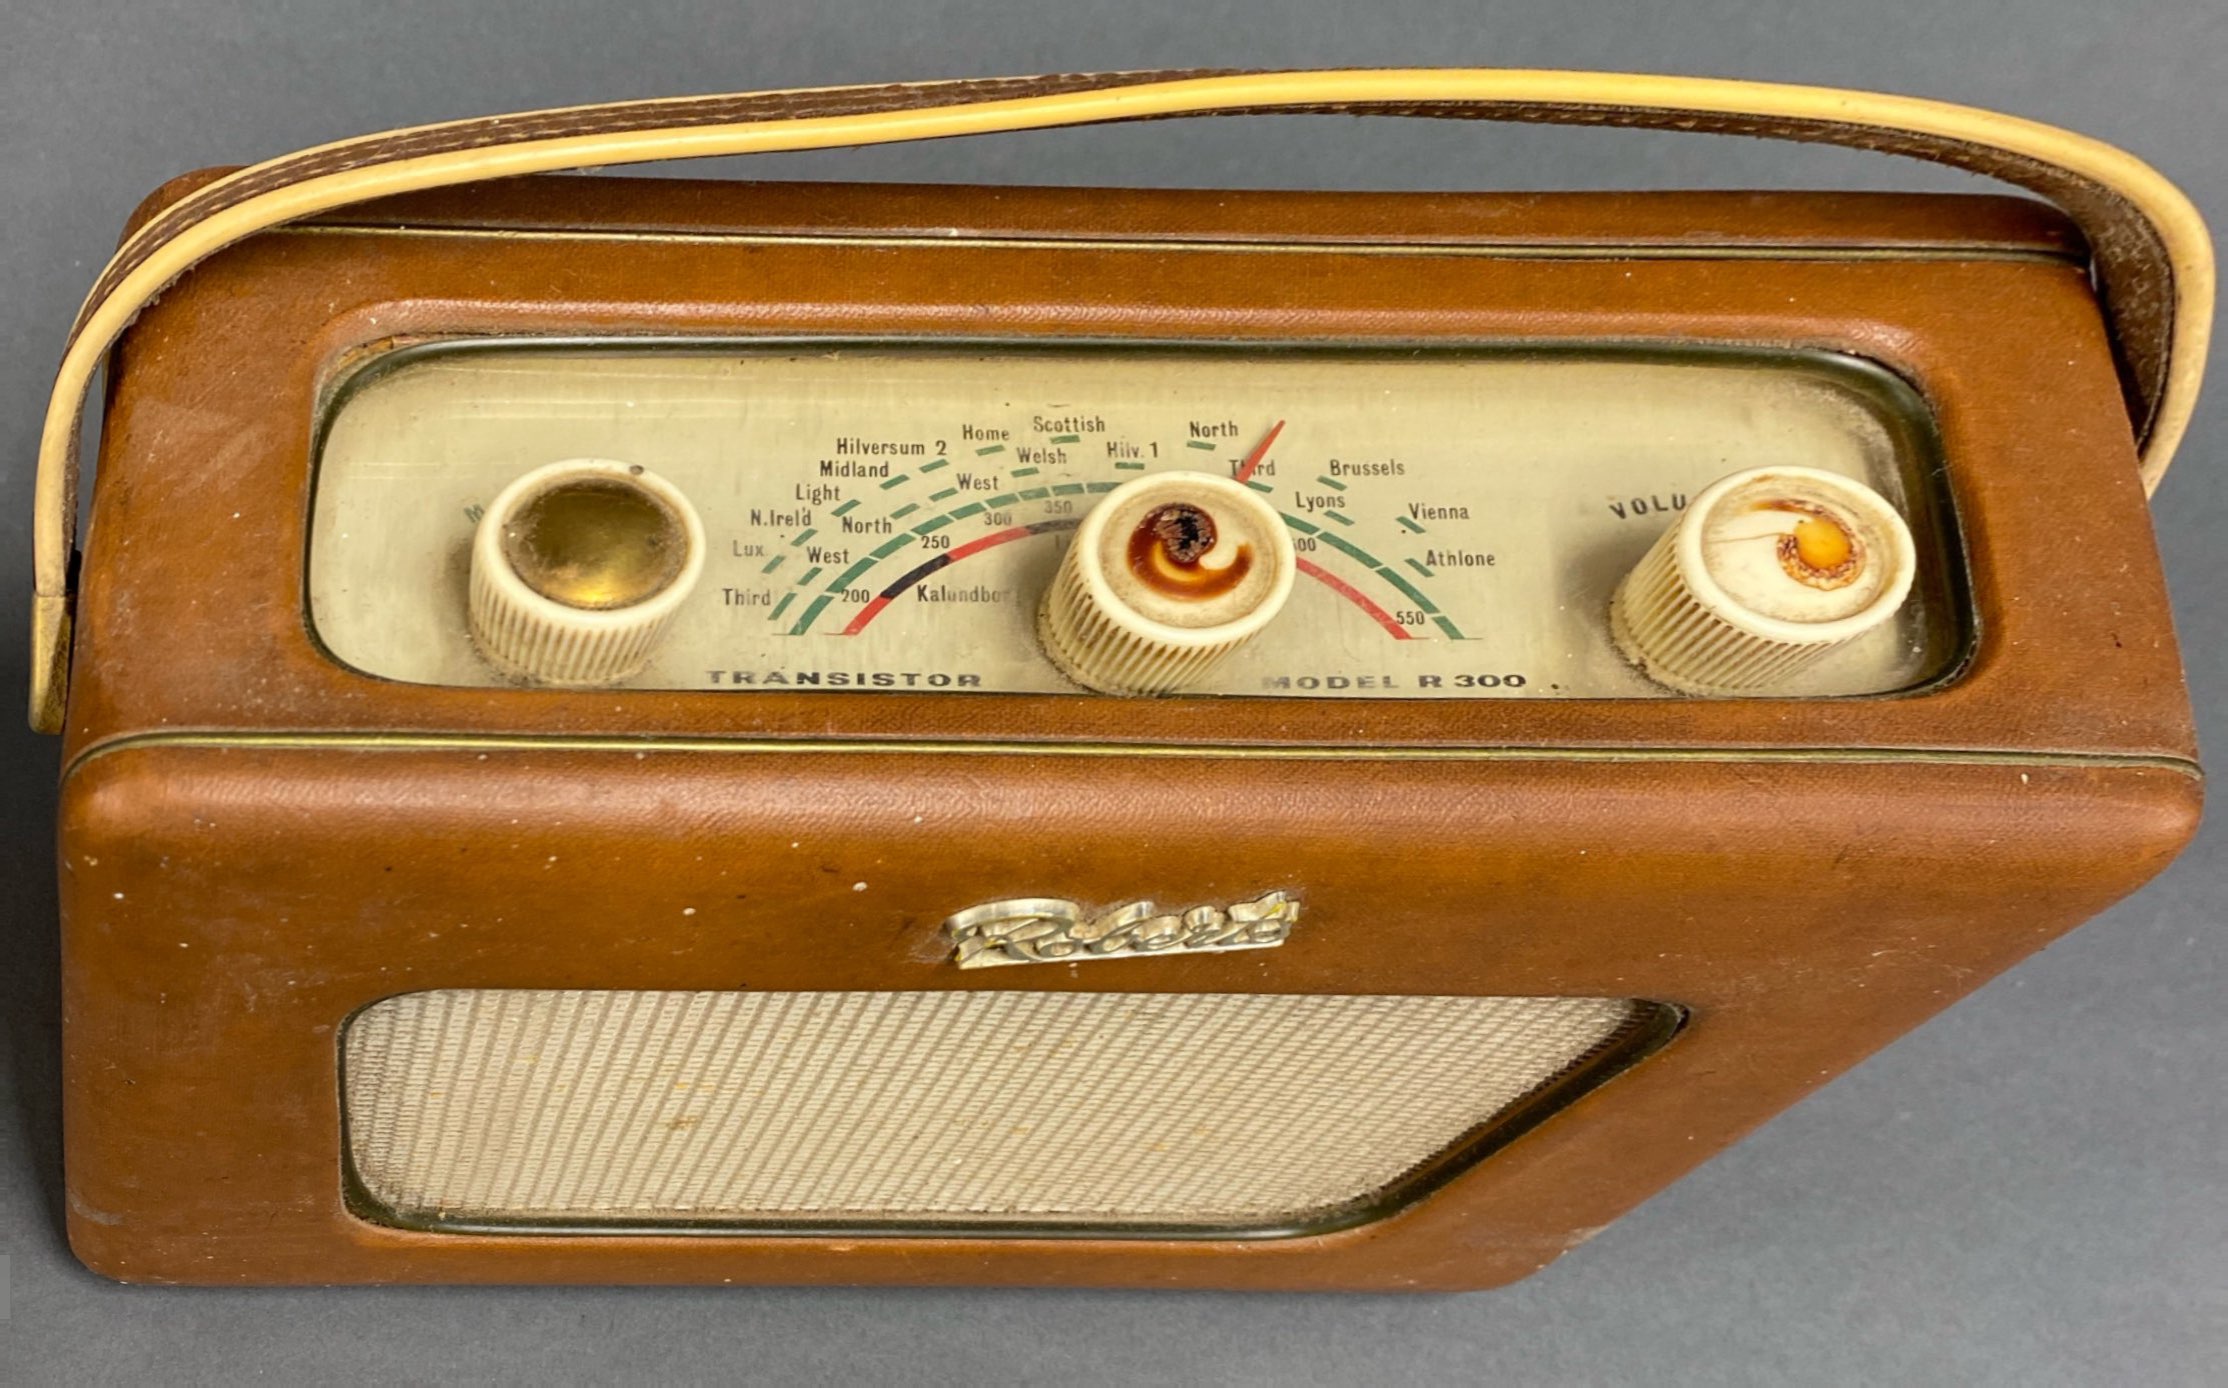 A group of three early Roberts transistor radios, including two R200 and one R300. - Image 3 of 5